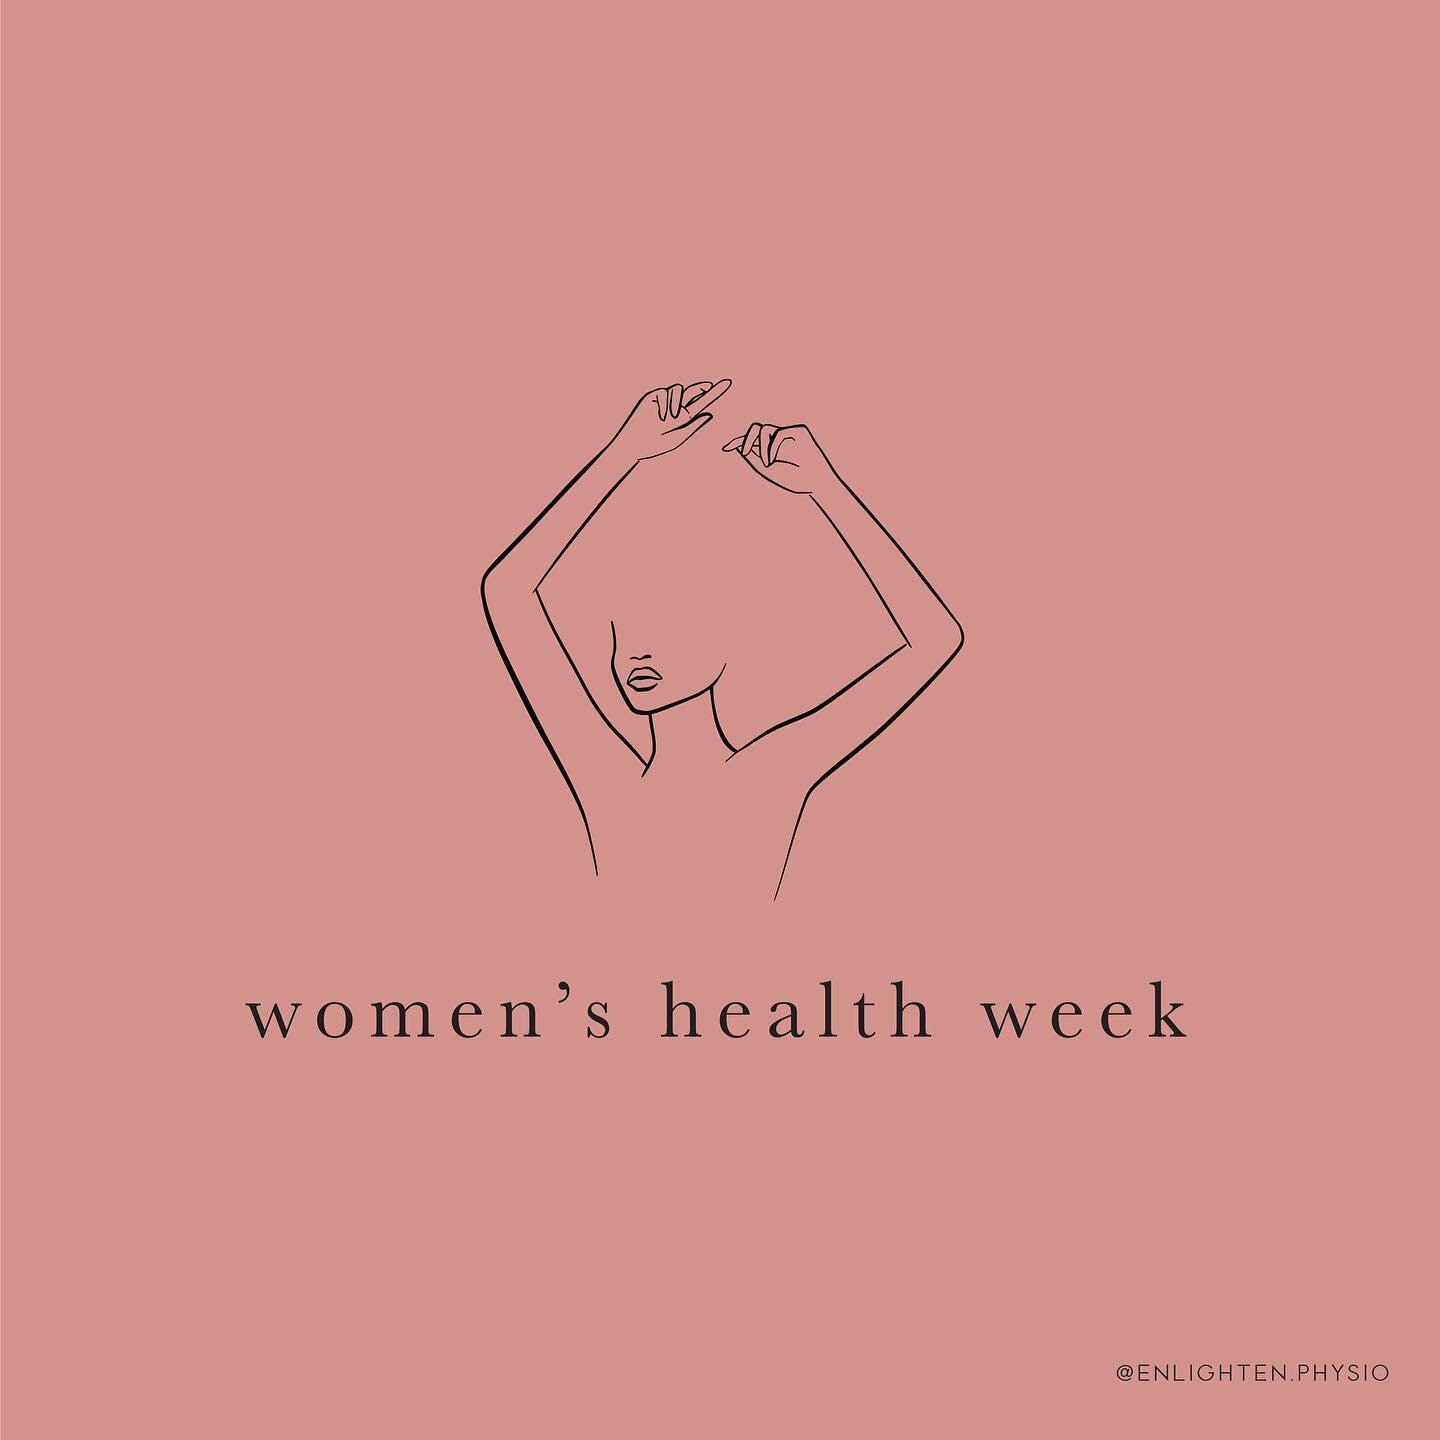 ✨Women&rsquo;s Health Week✨

Tomorrow marks the kick off for Women&rsquo;s Health Week 2022 (5th-11th Sept). A reminder to set aside time for us all to look after our own health and well-being.

Each day we will be popping a topic up however if there